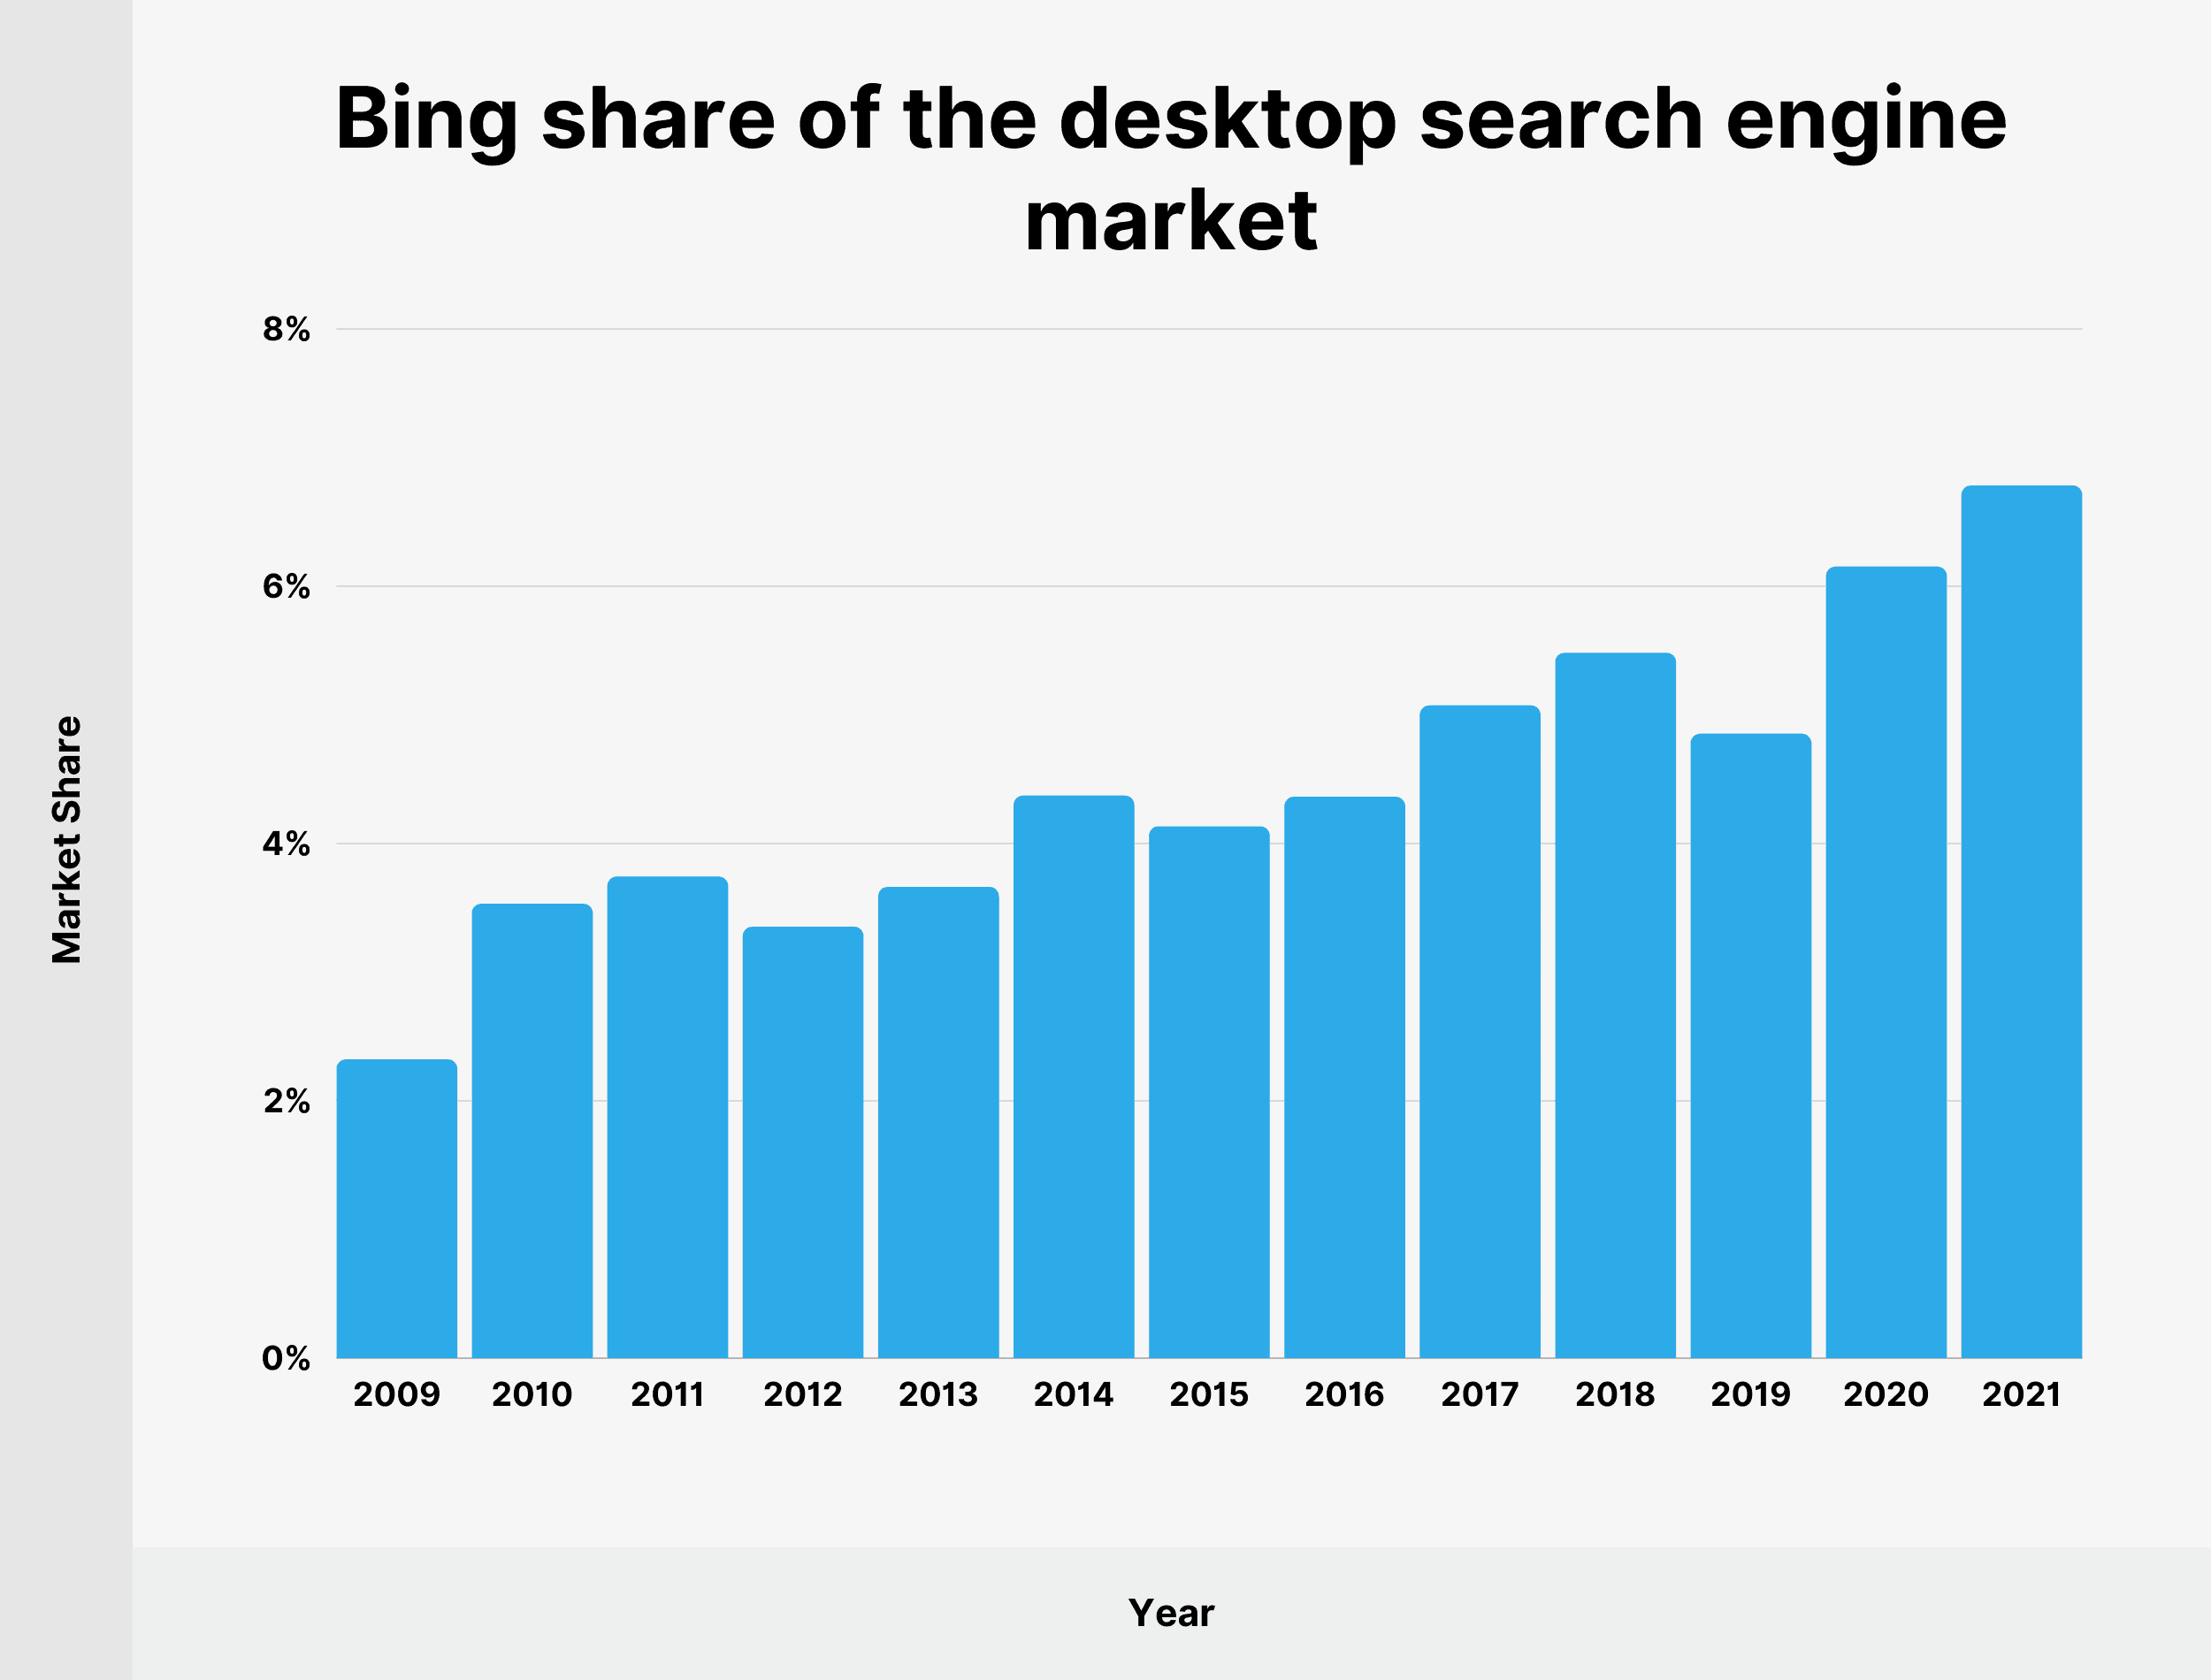 Bing share of the desktop search engine market